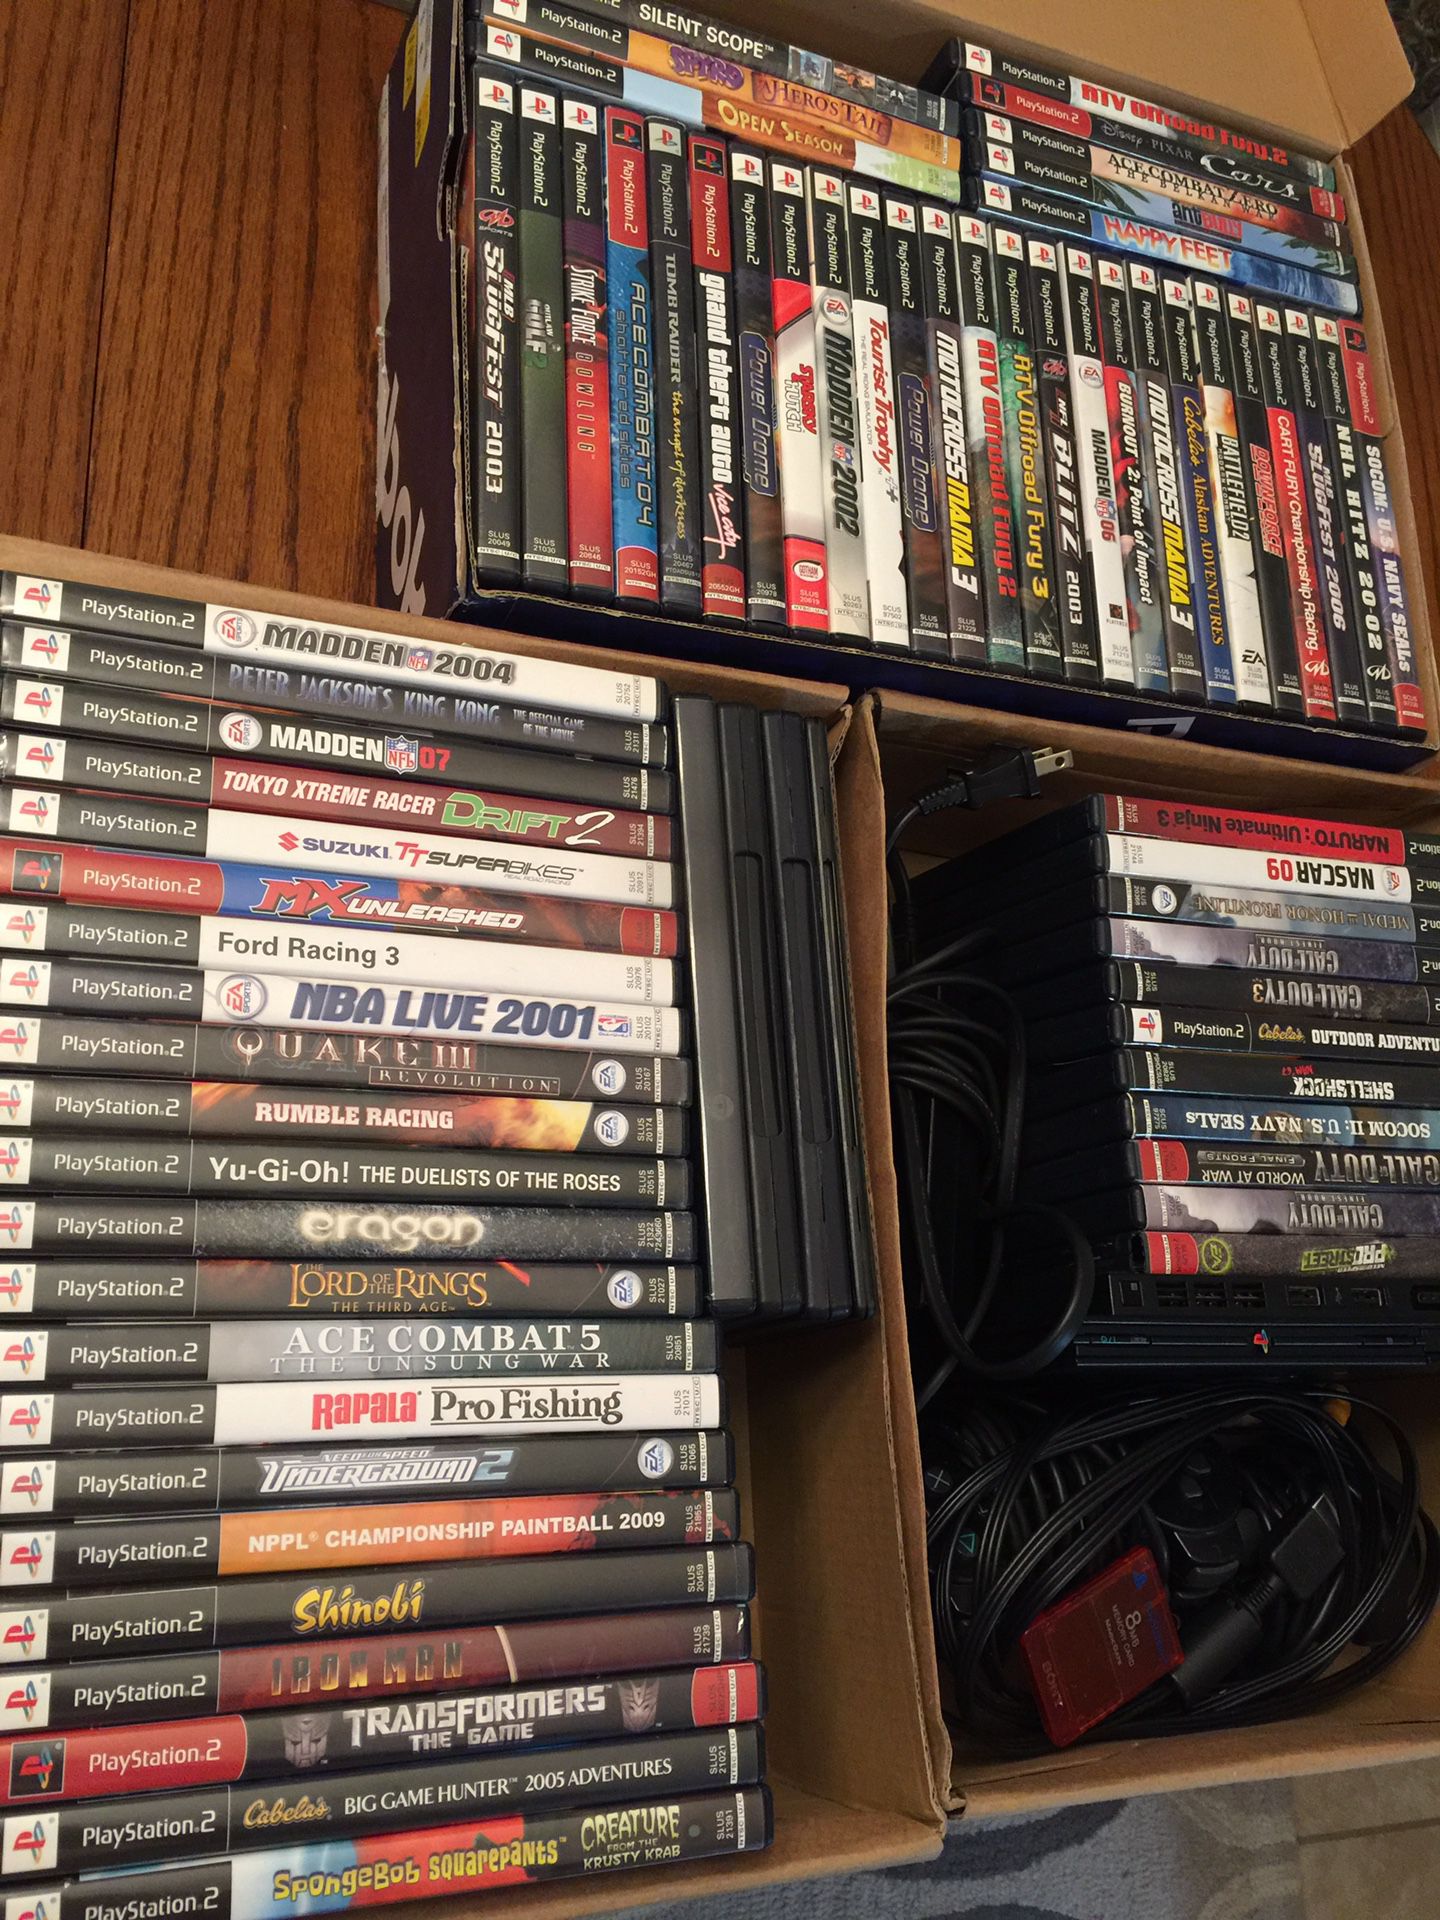 Ps2 with around 70 games